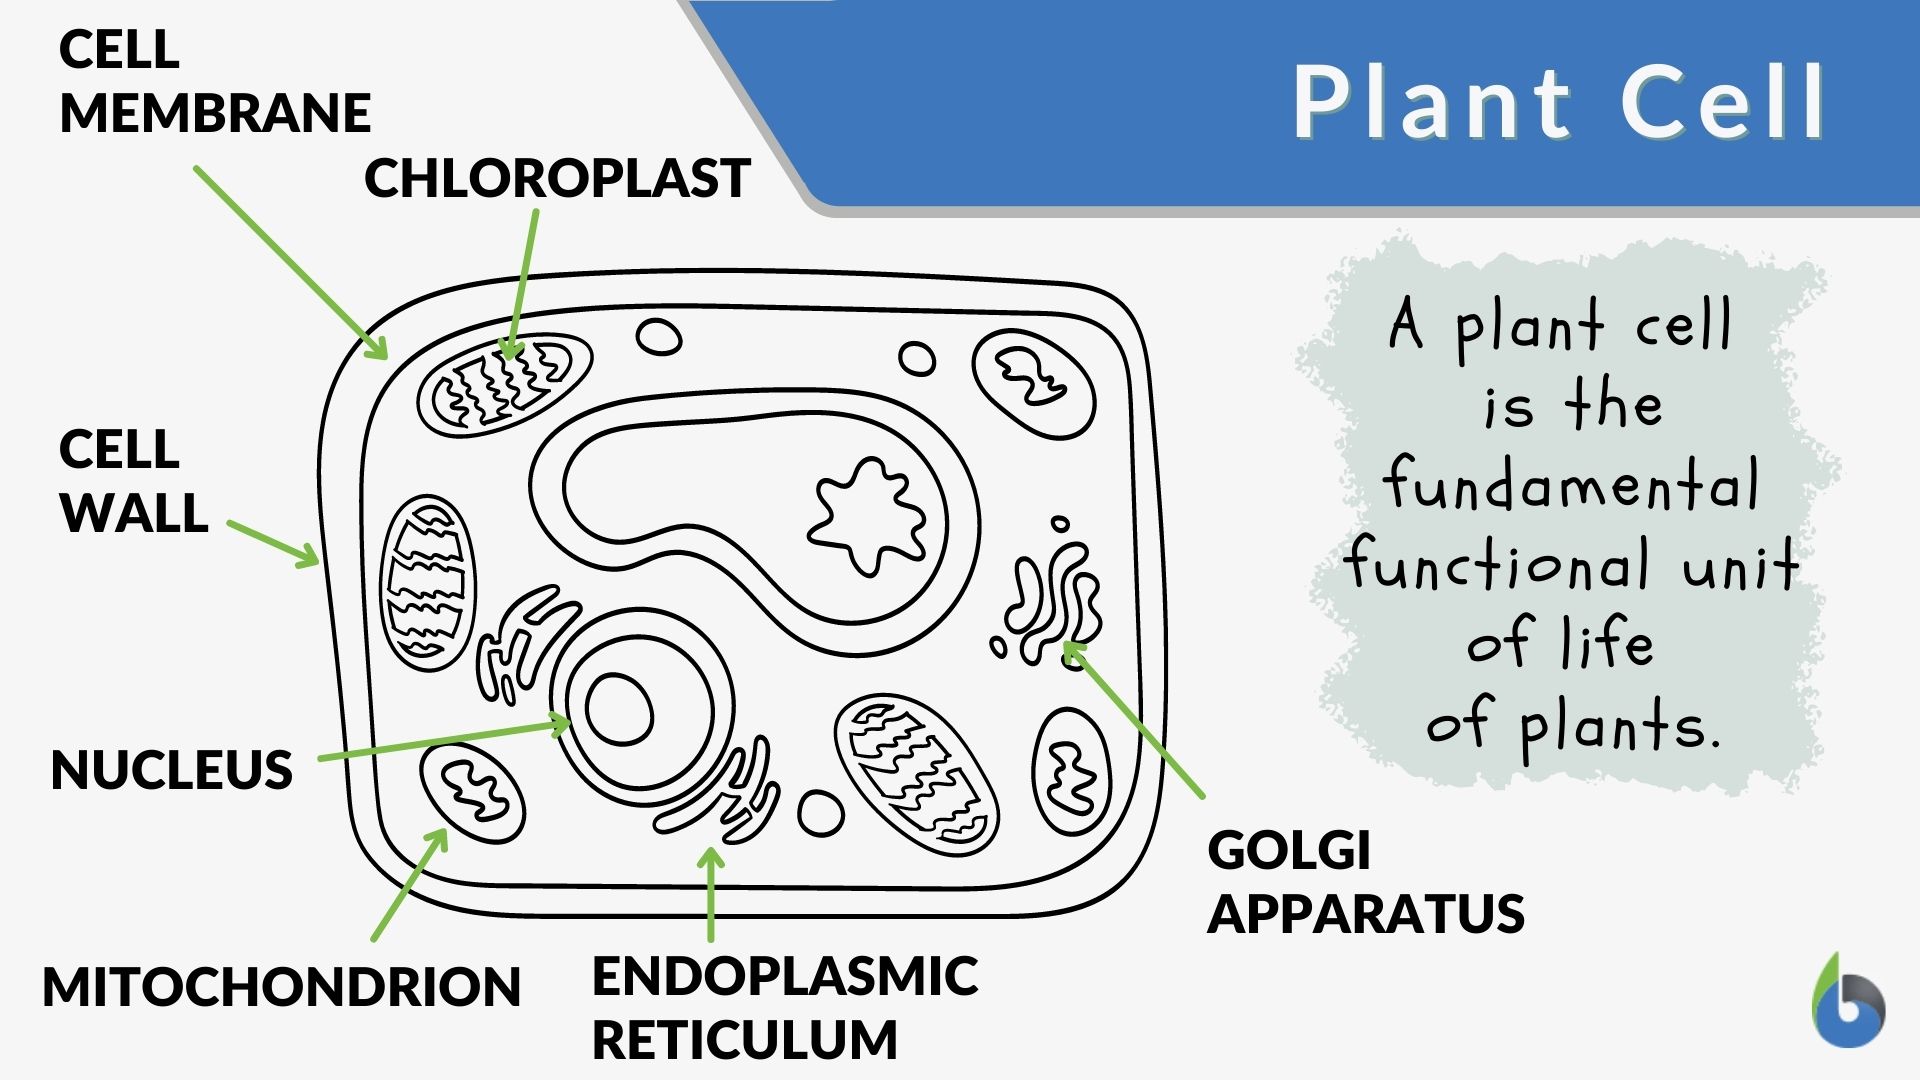 Cell Wall Found In Plant Animal Or Both - Both Plant And Animal Cell